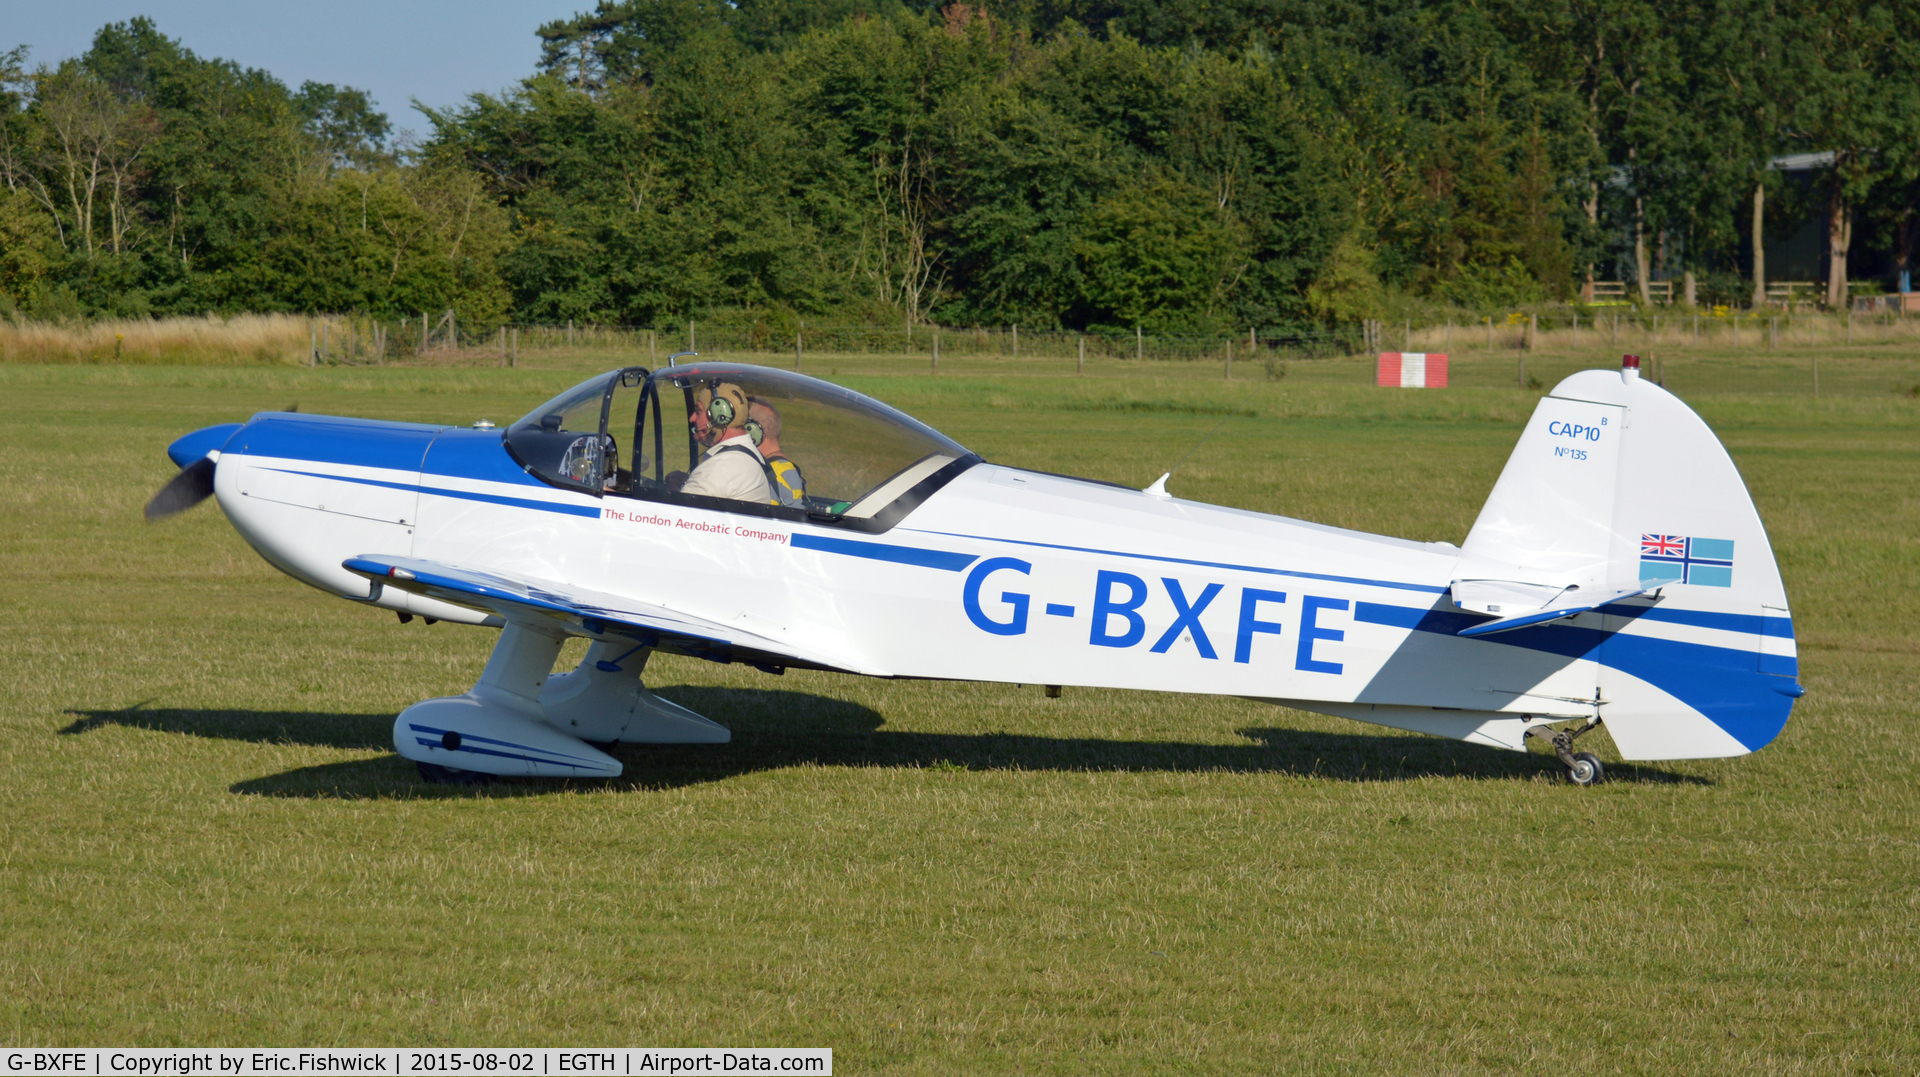 G-BXFE, 1981 Mudry CAP-10B C/N 135, 1. G-BXFE preparing to depart The Shuttleworth Wings and Wheels Airshow, Aug. 2015.